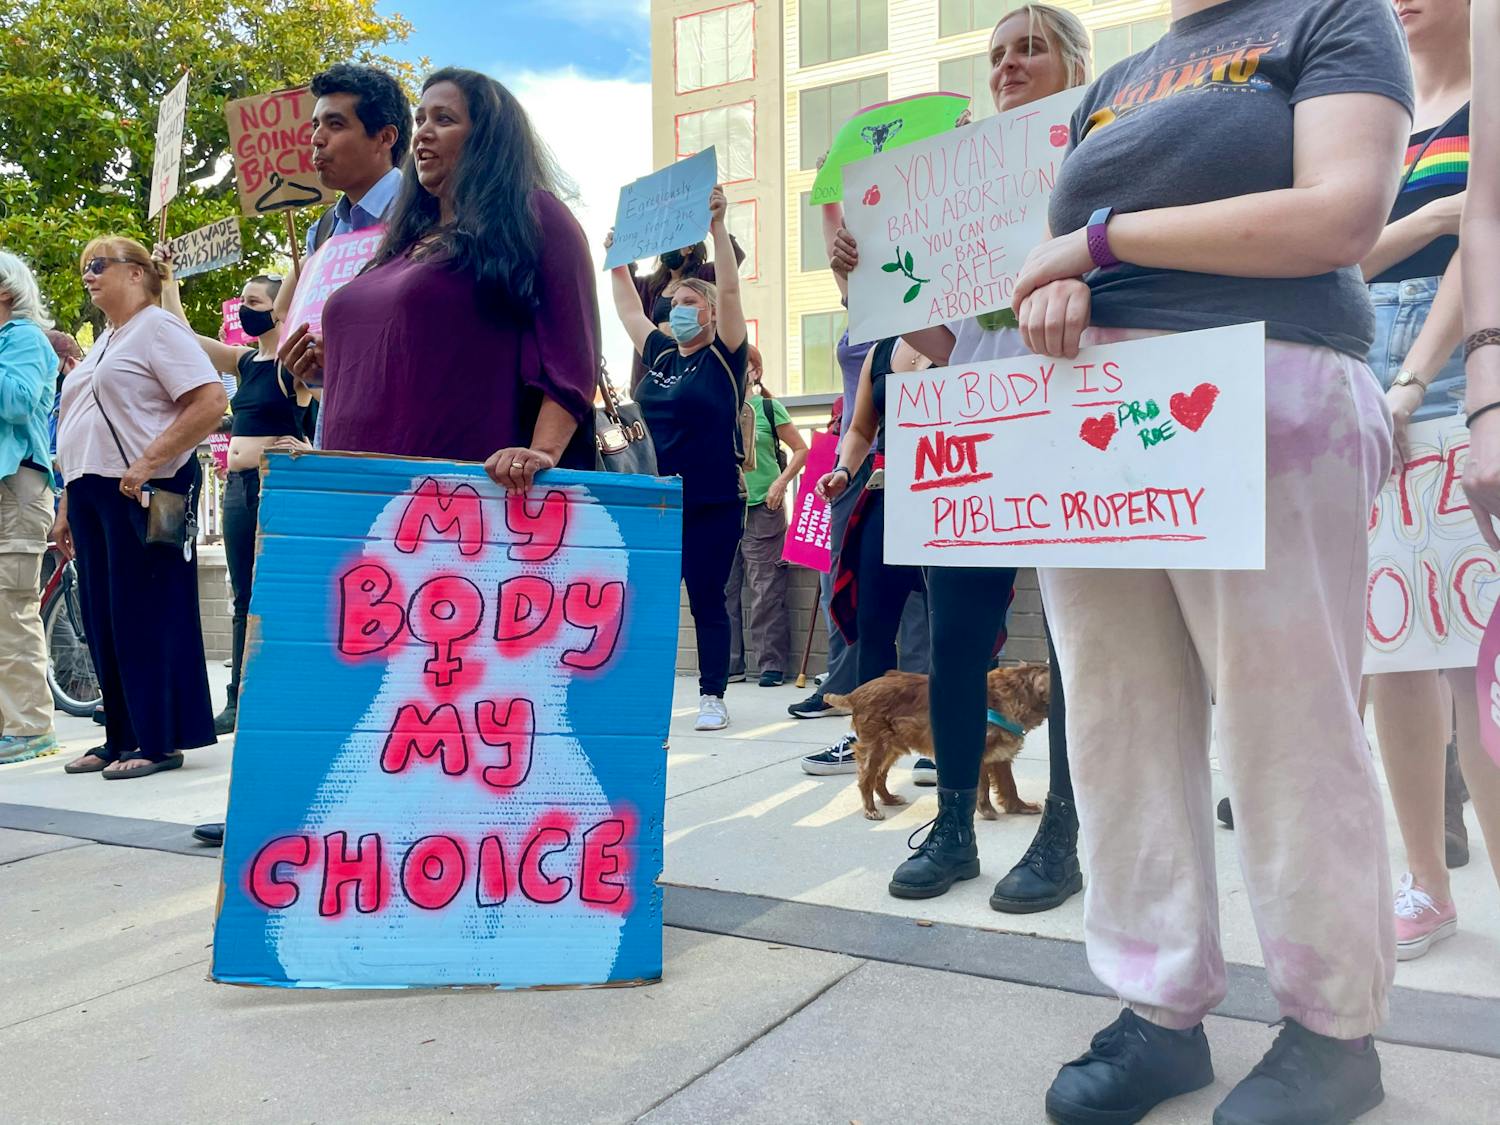 More than 100 protesters stand outside a downtown Gainesville courthouse on Tuesday, May 3, 2022. They gathered to support abortion rights after reports the Supreme Court would overturn Roe v. Wade.